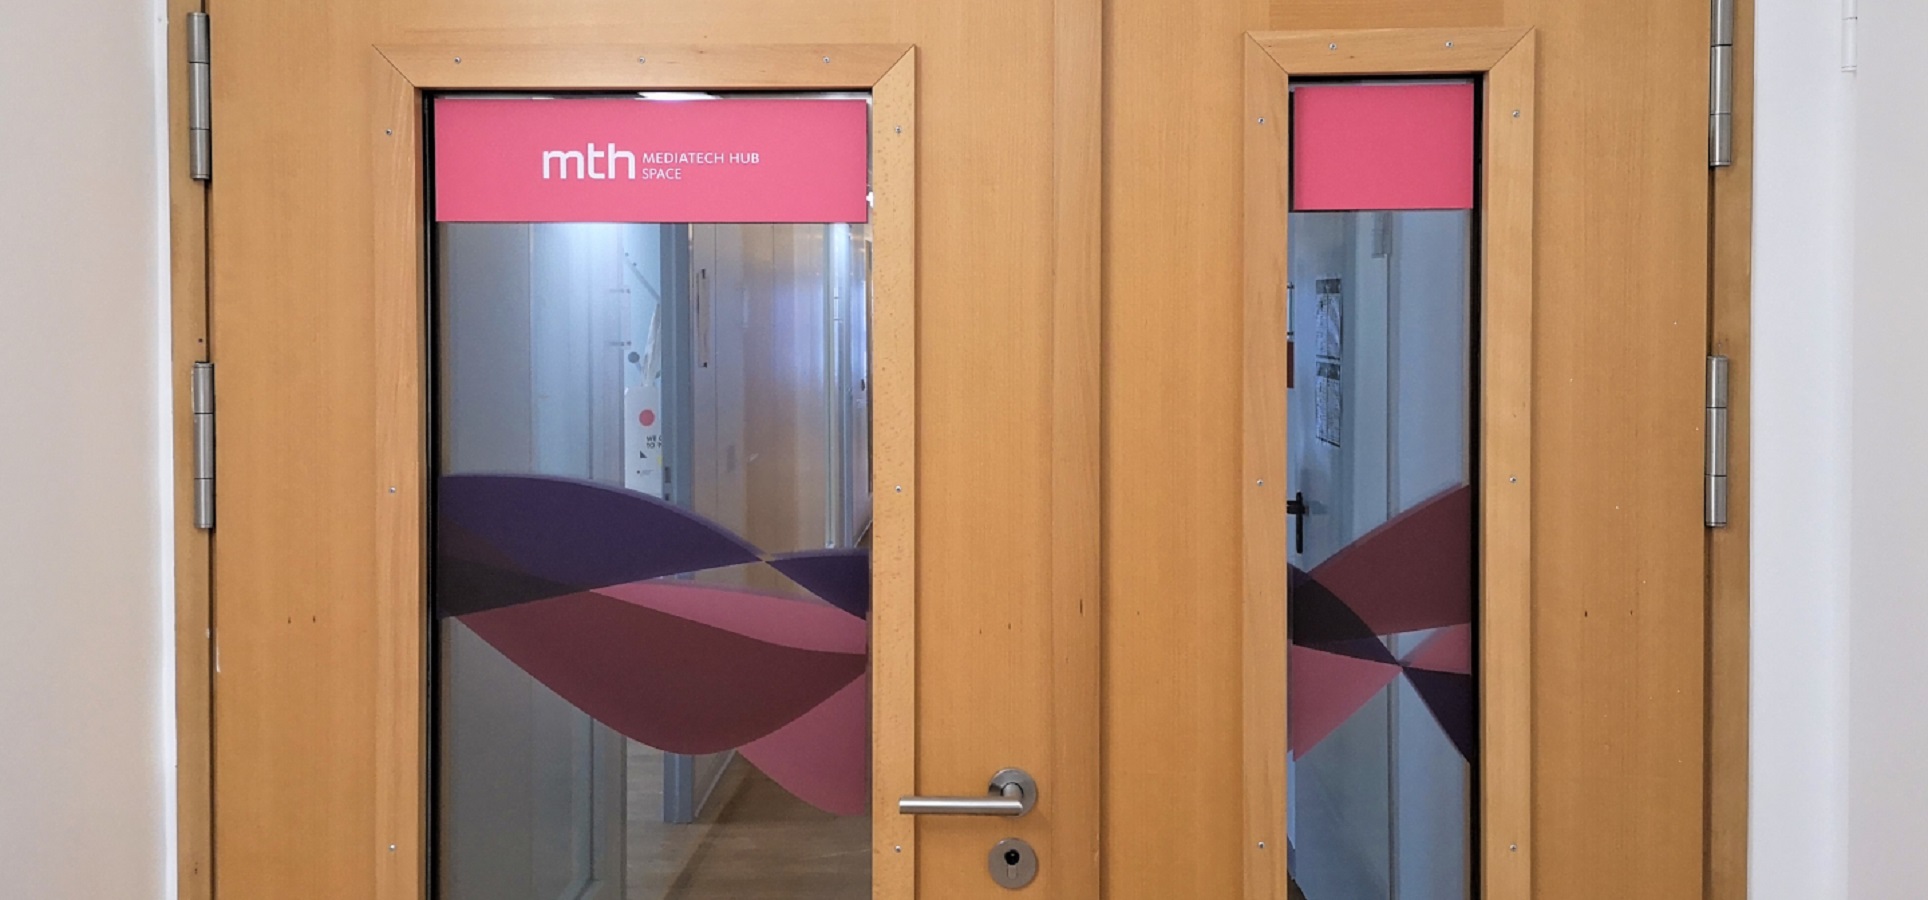 Foto: MTH Space - Community und Office Space - MediaTech Hub Potsdam © MediaTech Hub Potsdam